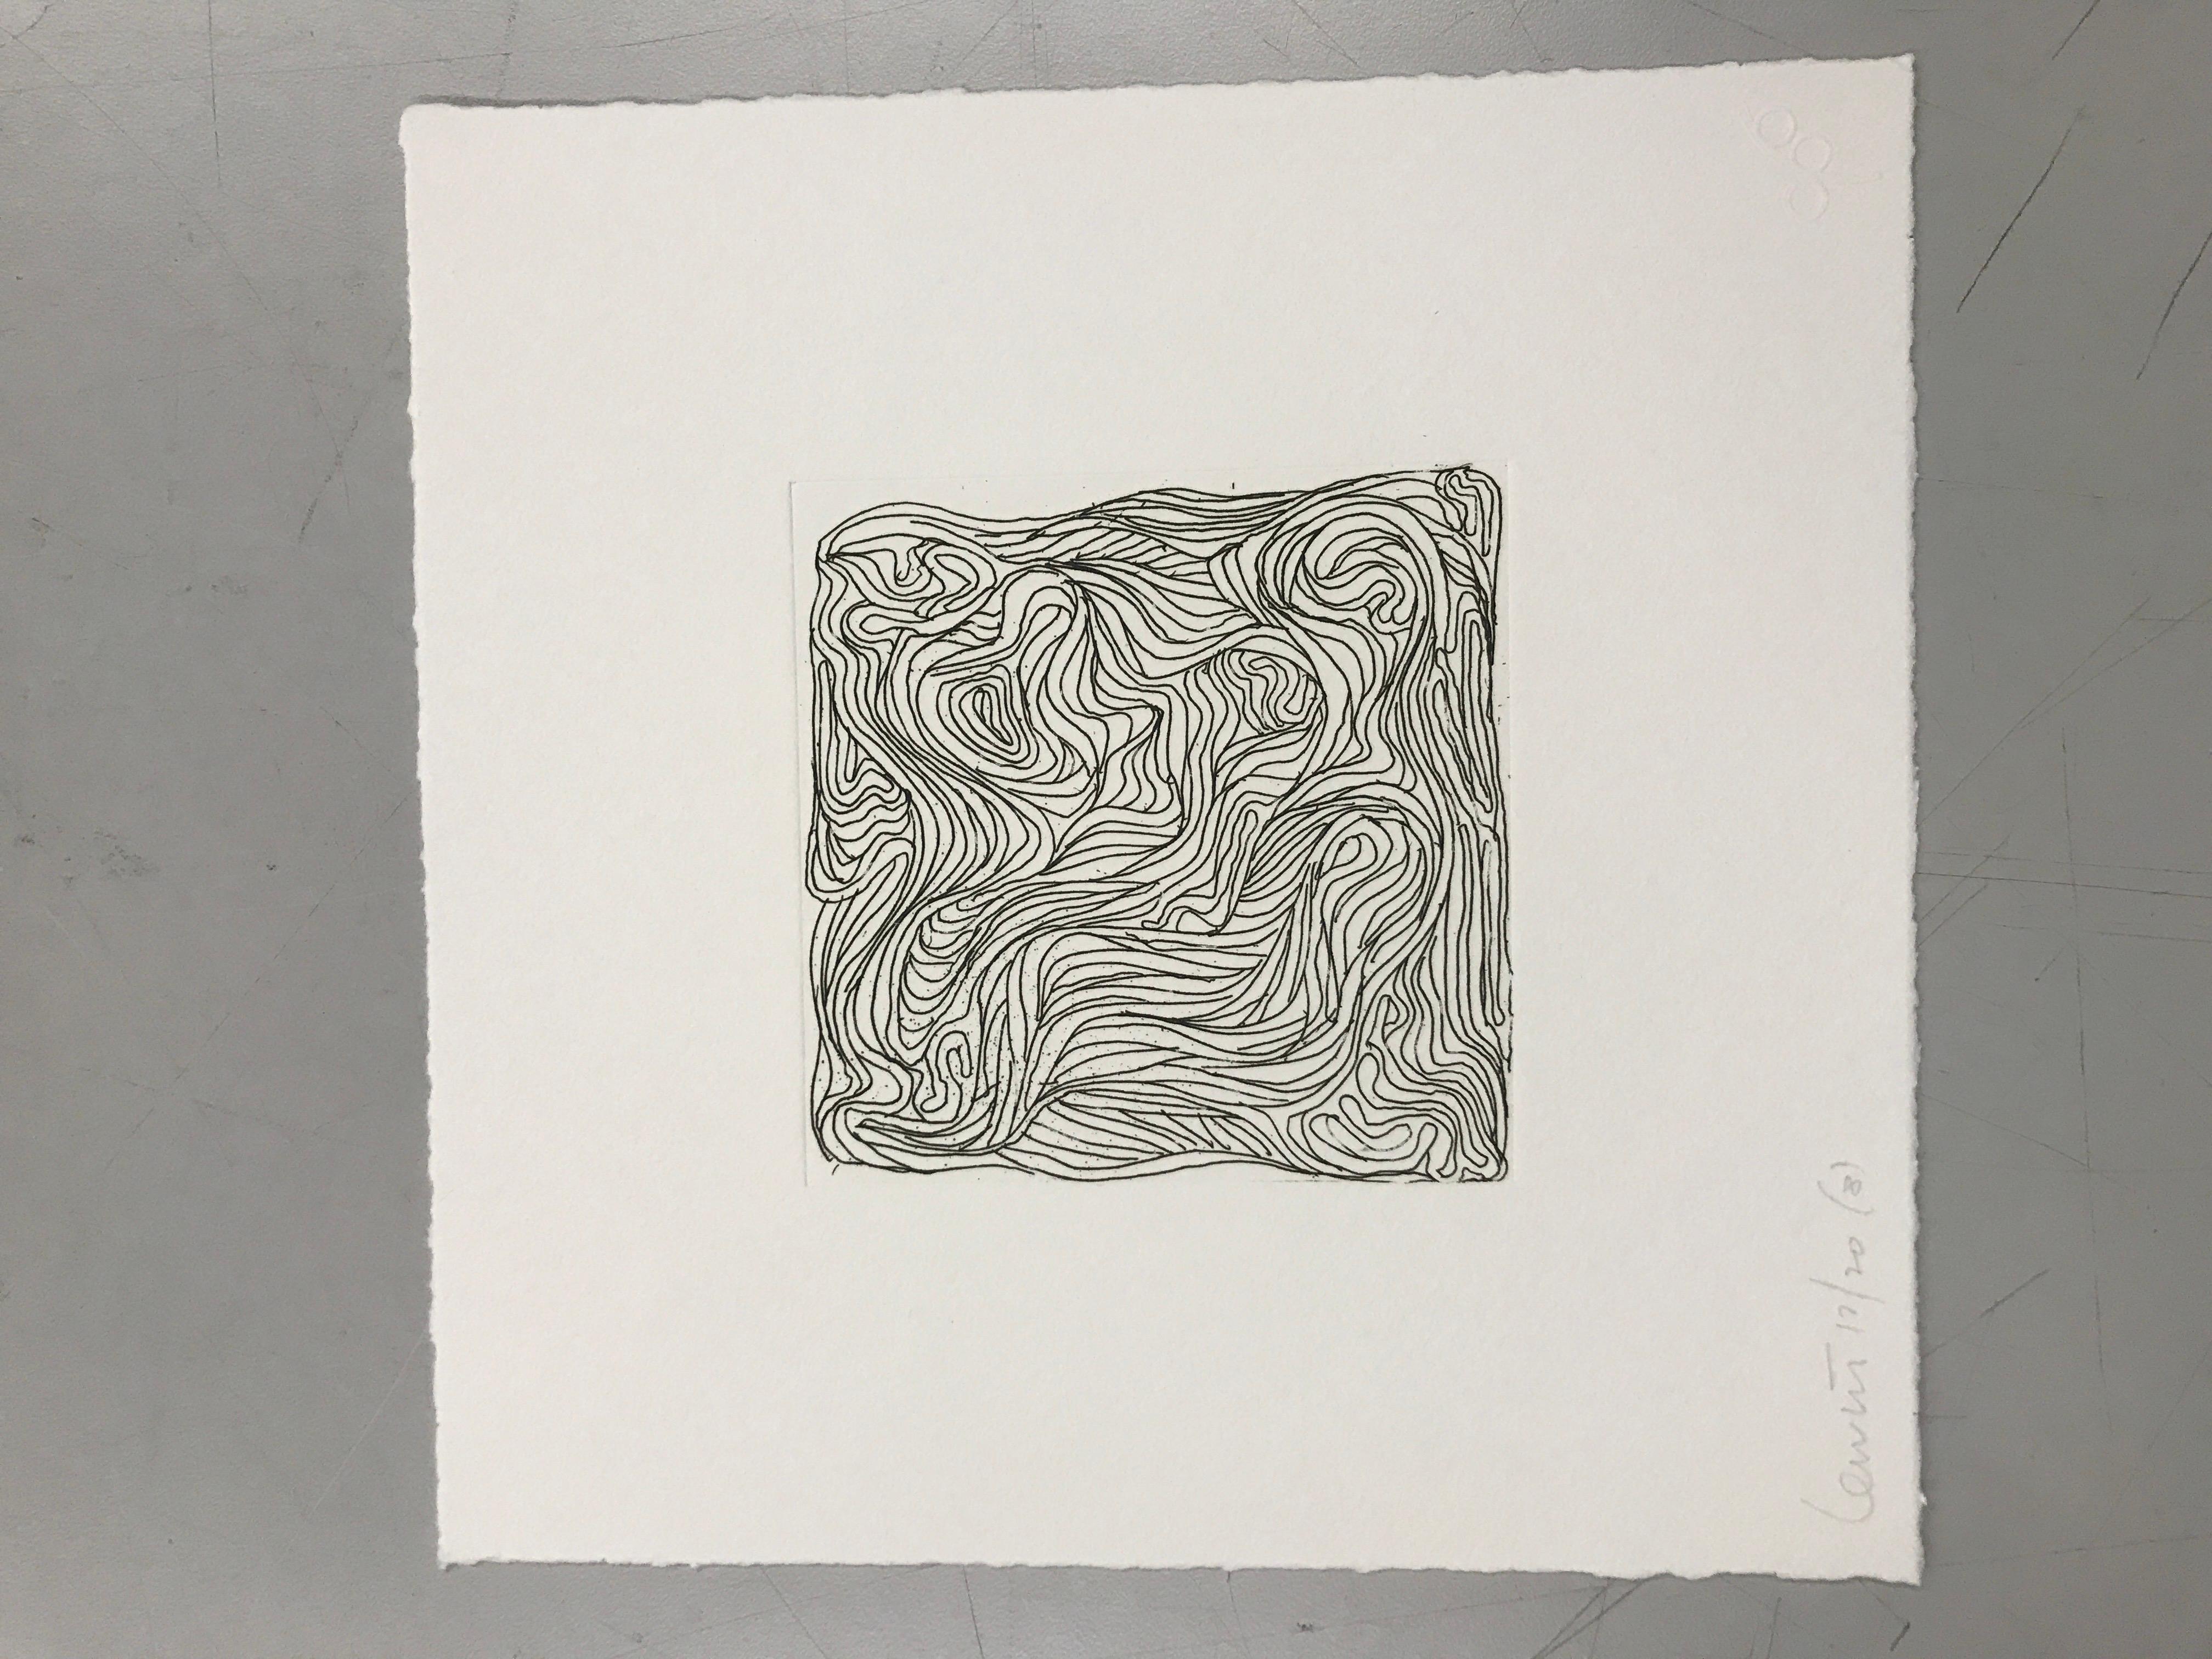 Eight Small Etchings - Contemporary Print by Sol LeWitt